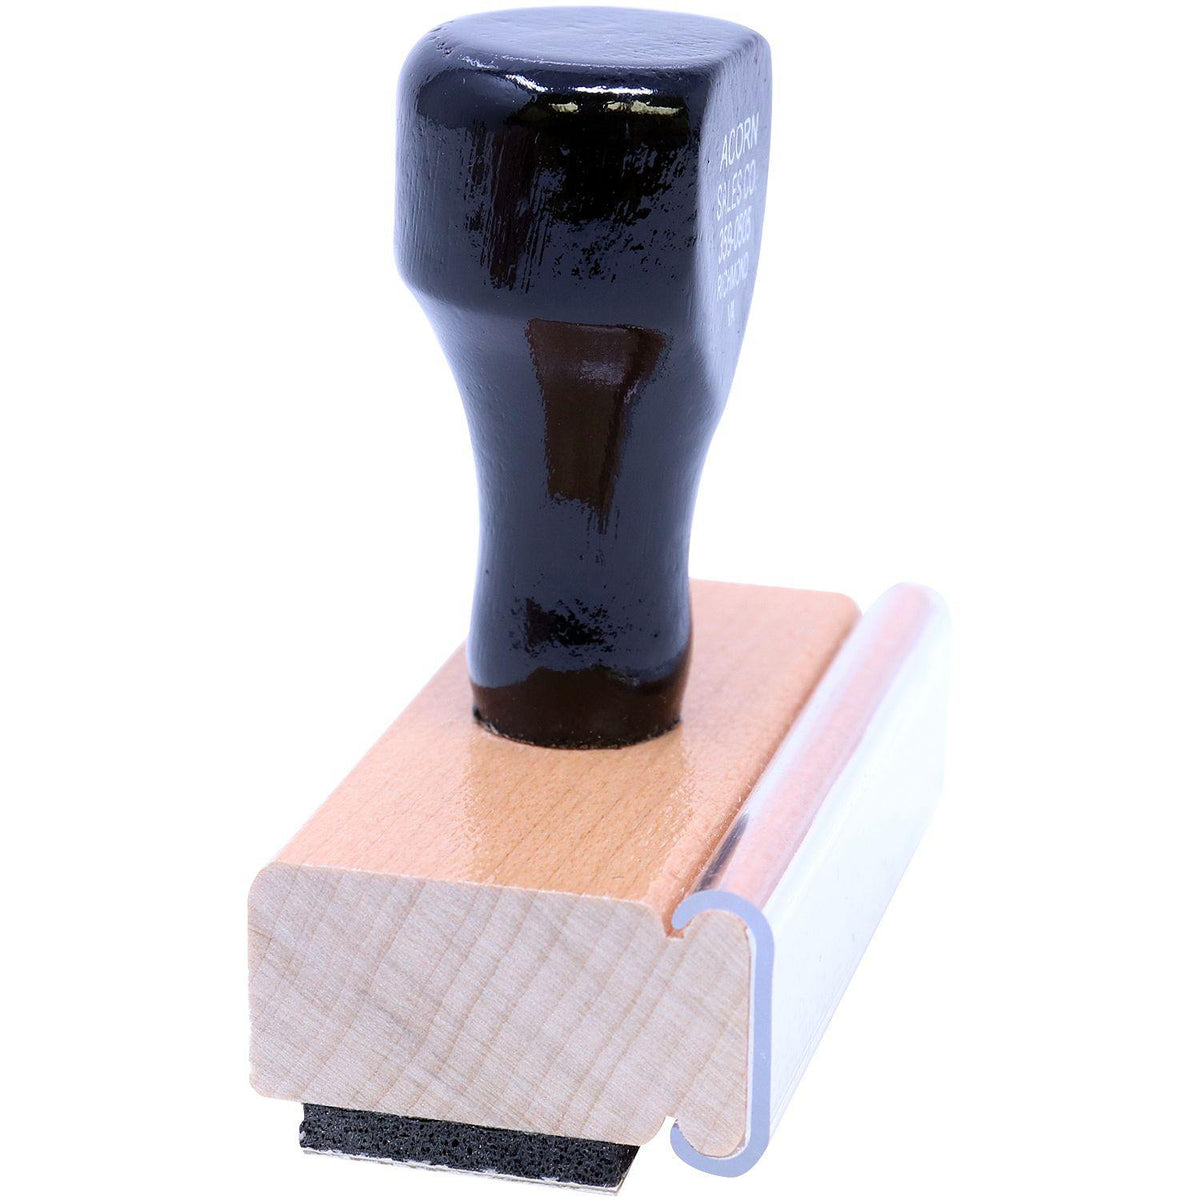 Side View of Italic Rush Rubber Stamp at an Angle